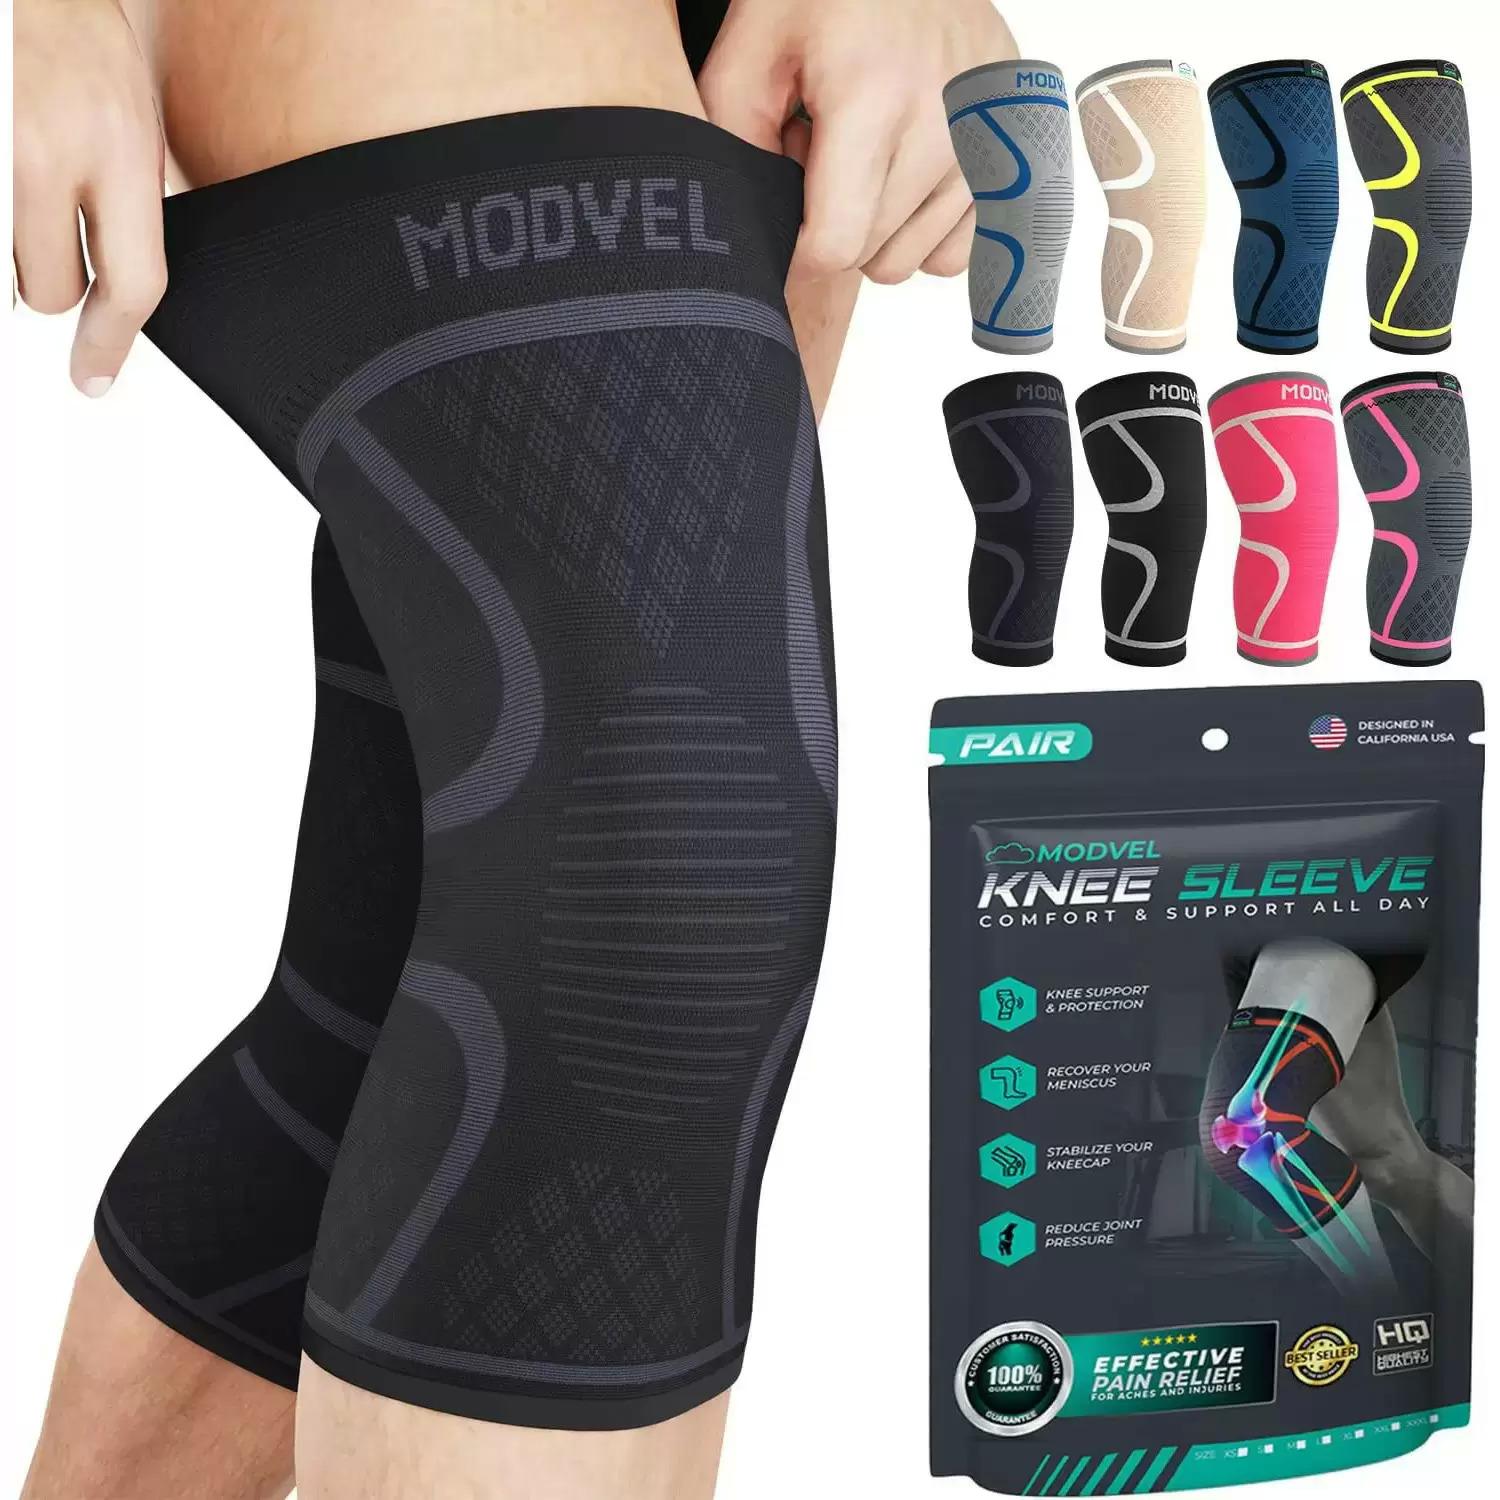 2 Modvel Knee Compression Sleeves for $9.61